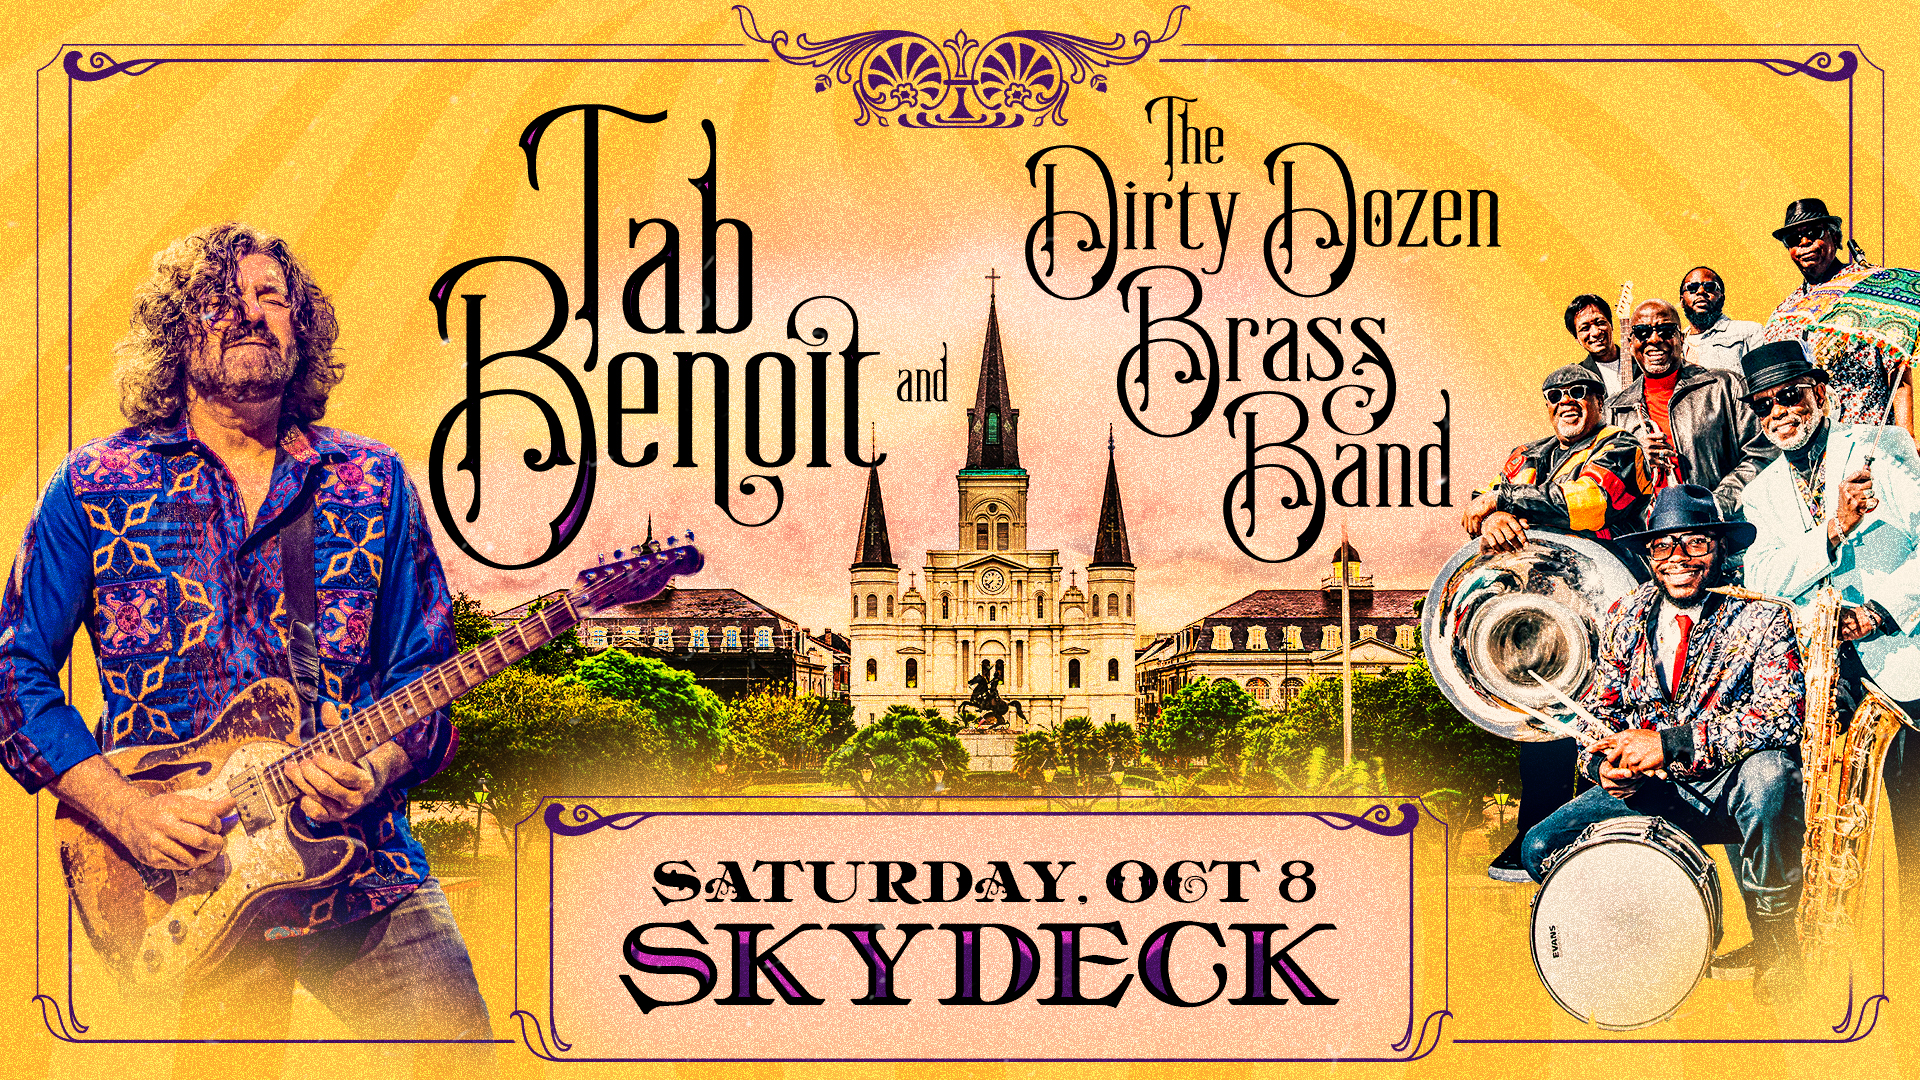 Promo image of Tab Benoit with Special Guest Dirty Dozen Brass Band on Skydeck